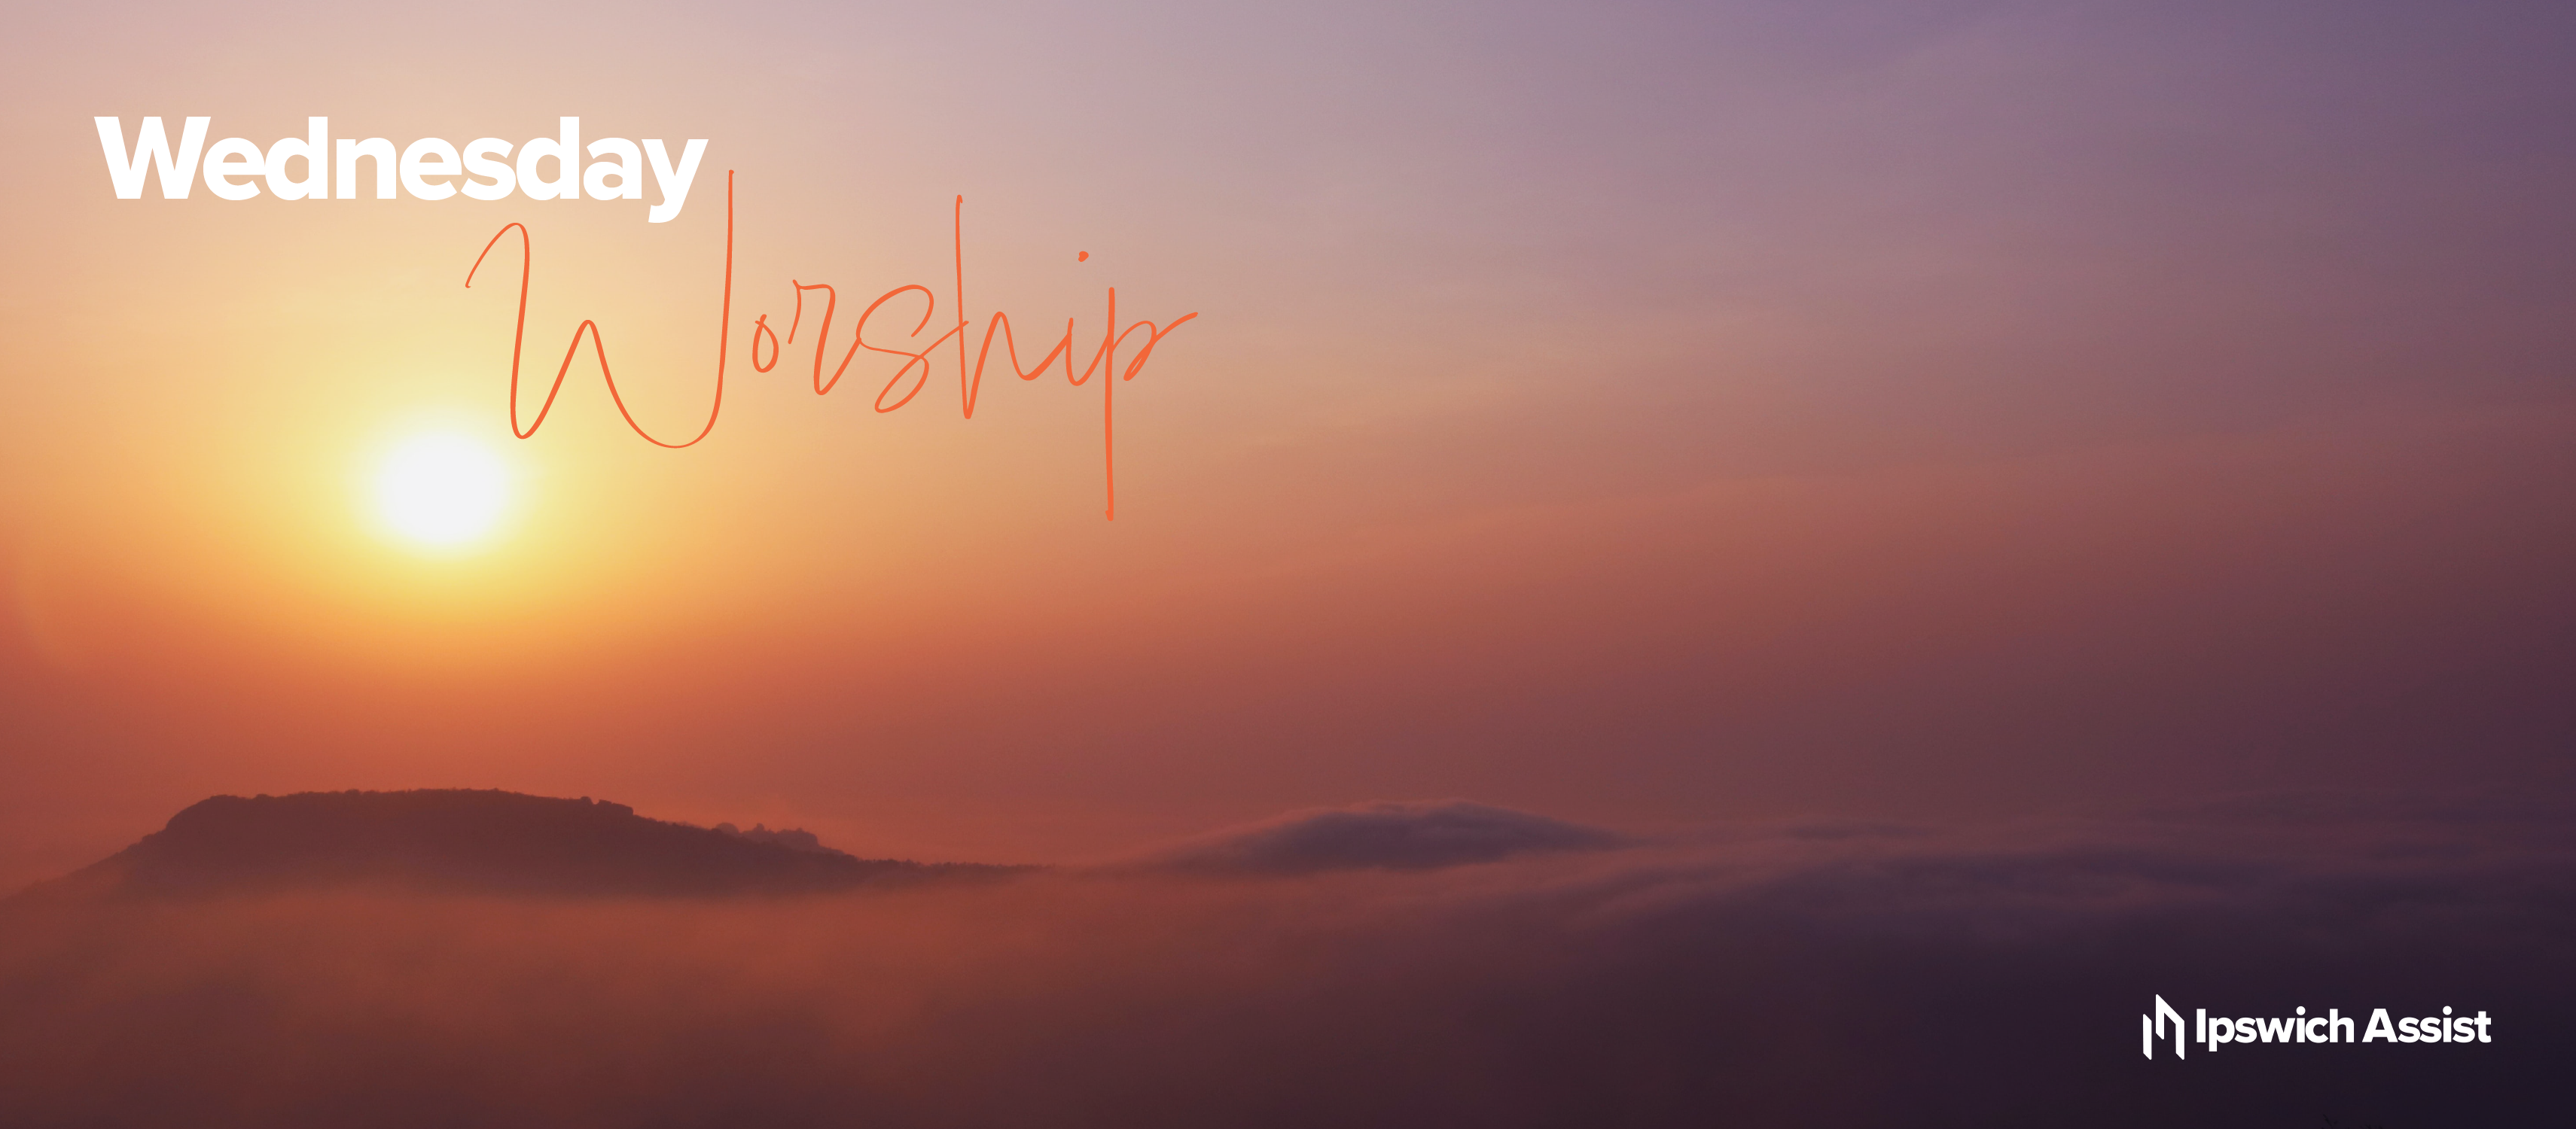 Image of golden sunrise, with text across it "Wednesday Worship"